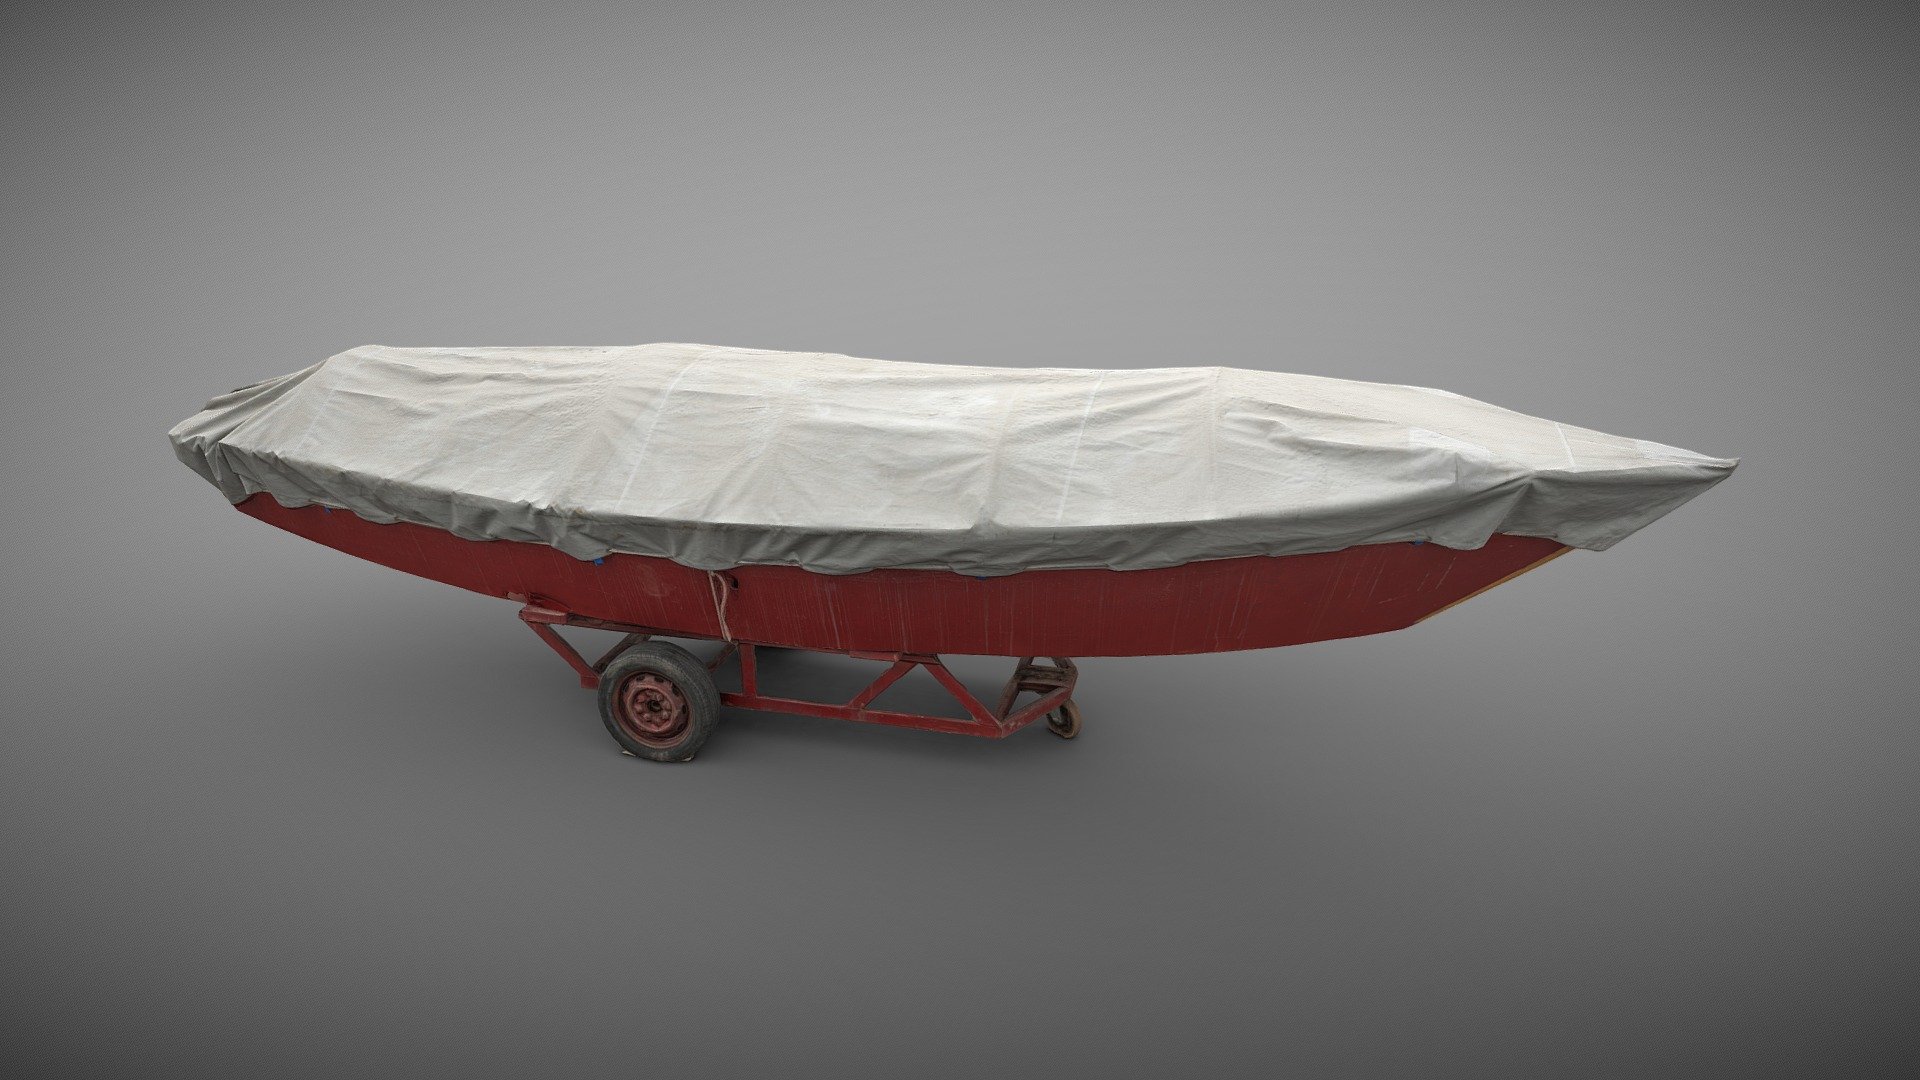 Topped up quick low poly version of a red boat with cover directly from a raw photogrammetry scan.

2x 8K diffuse, 2x4k normals, 2x4k AO 3d model